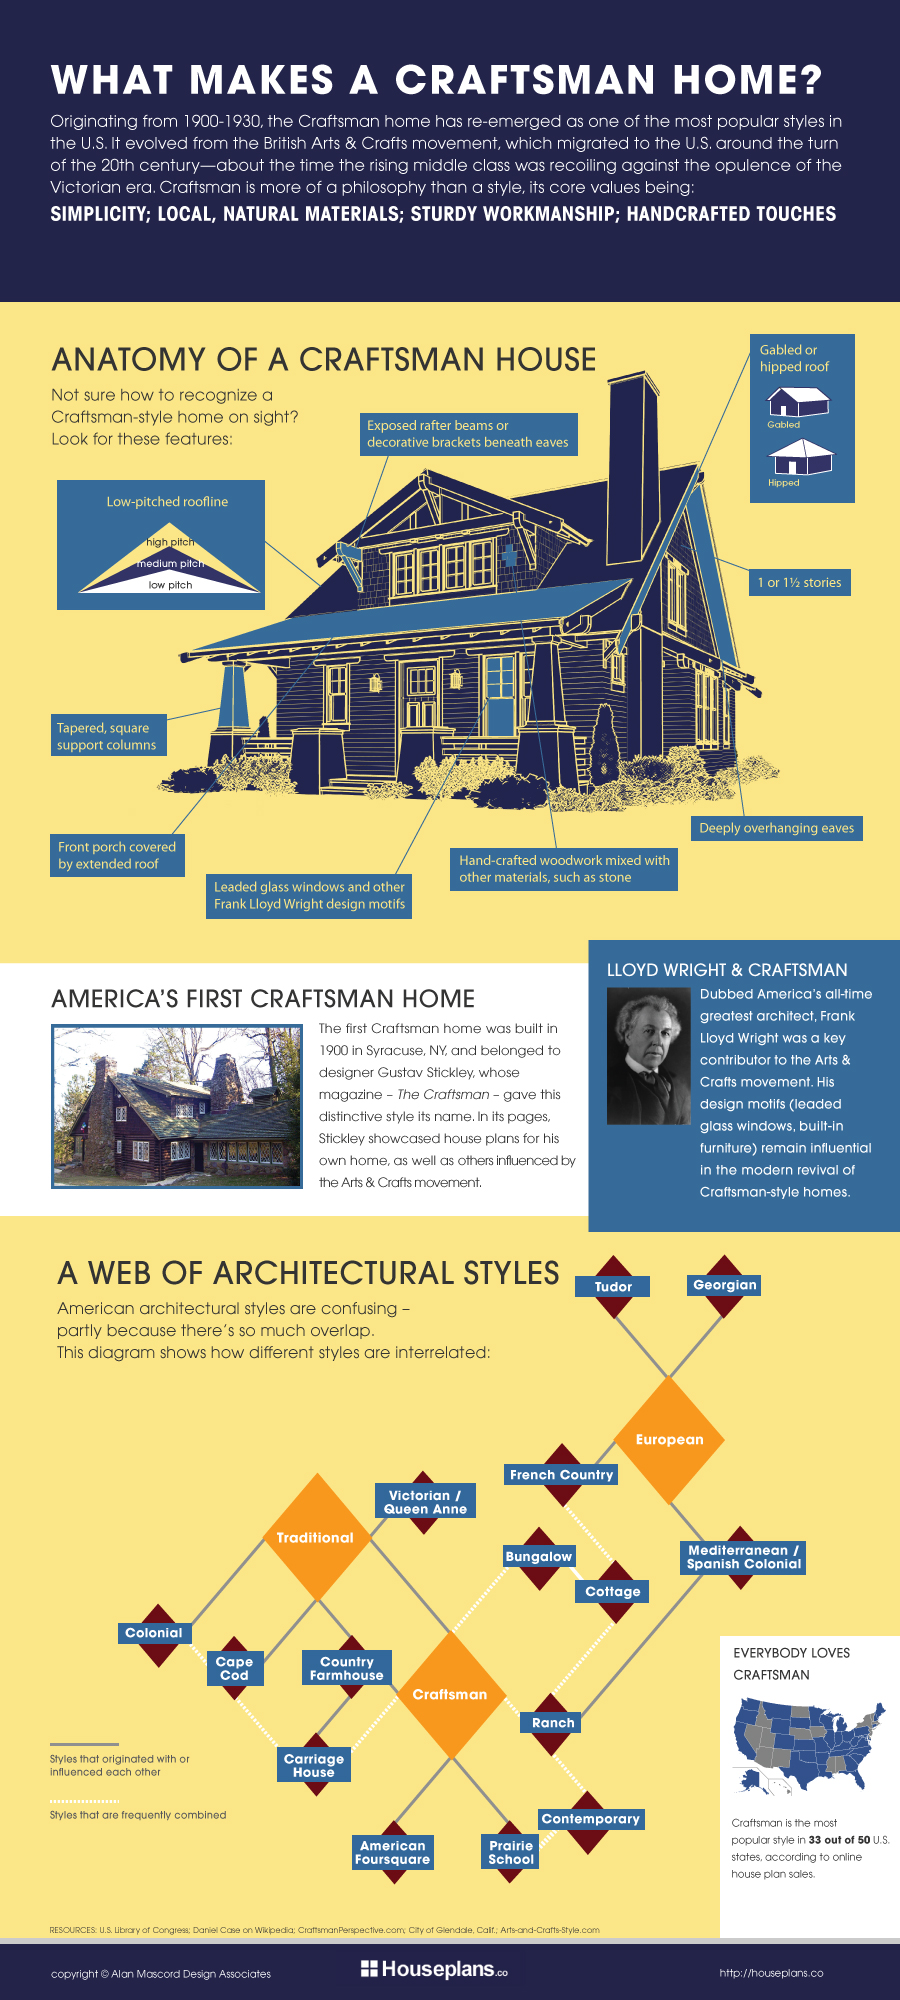 What Makes a Craftsman Home?